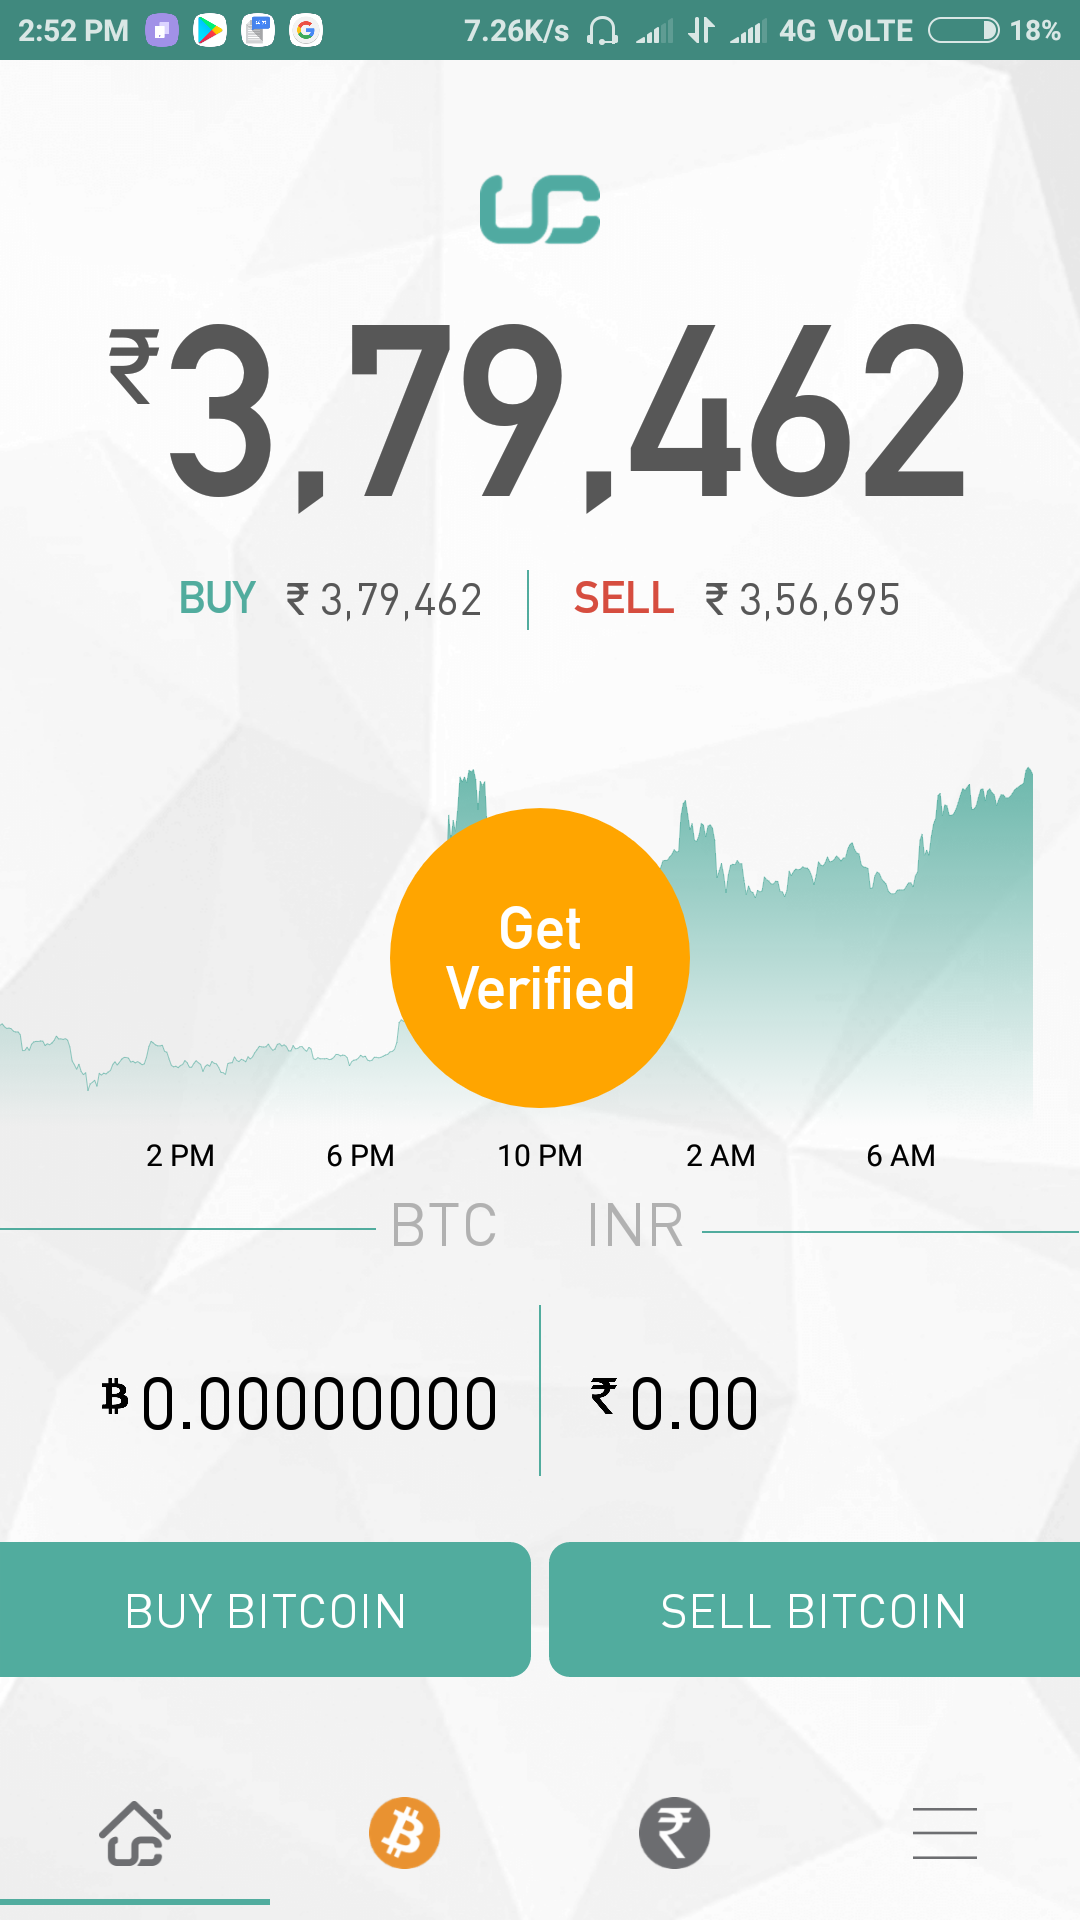 Bitcoin current price in india bitstamp us tax